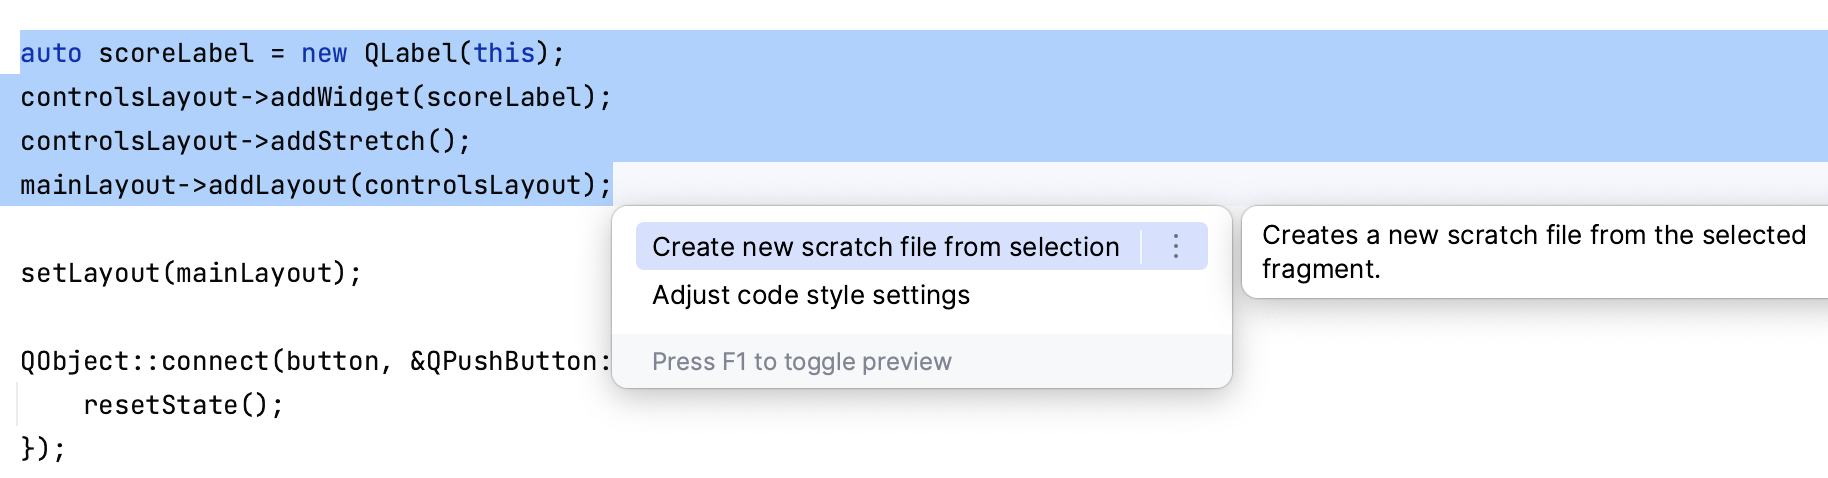  Creating a scratch file from selection